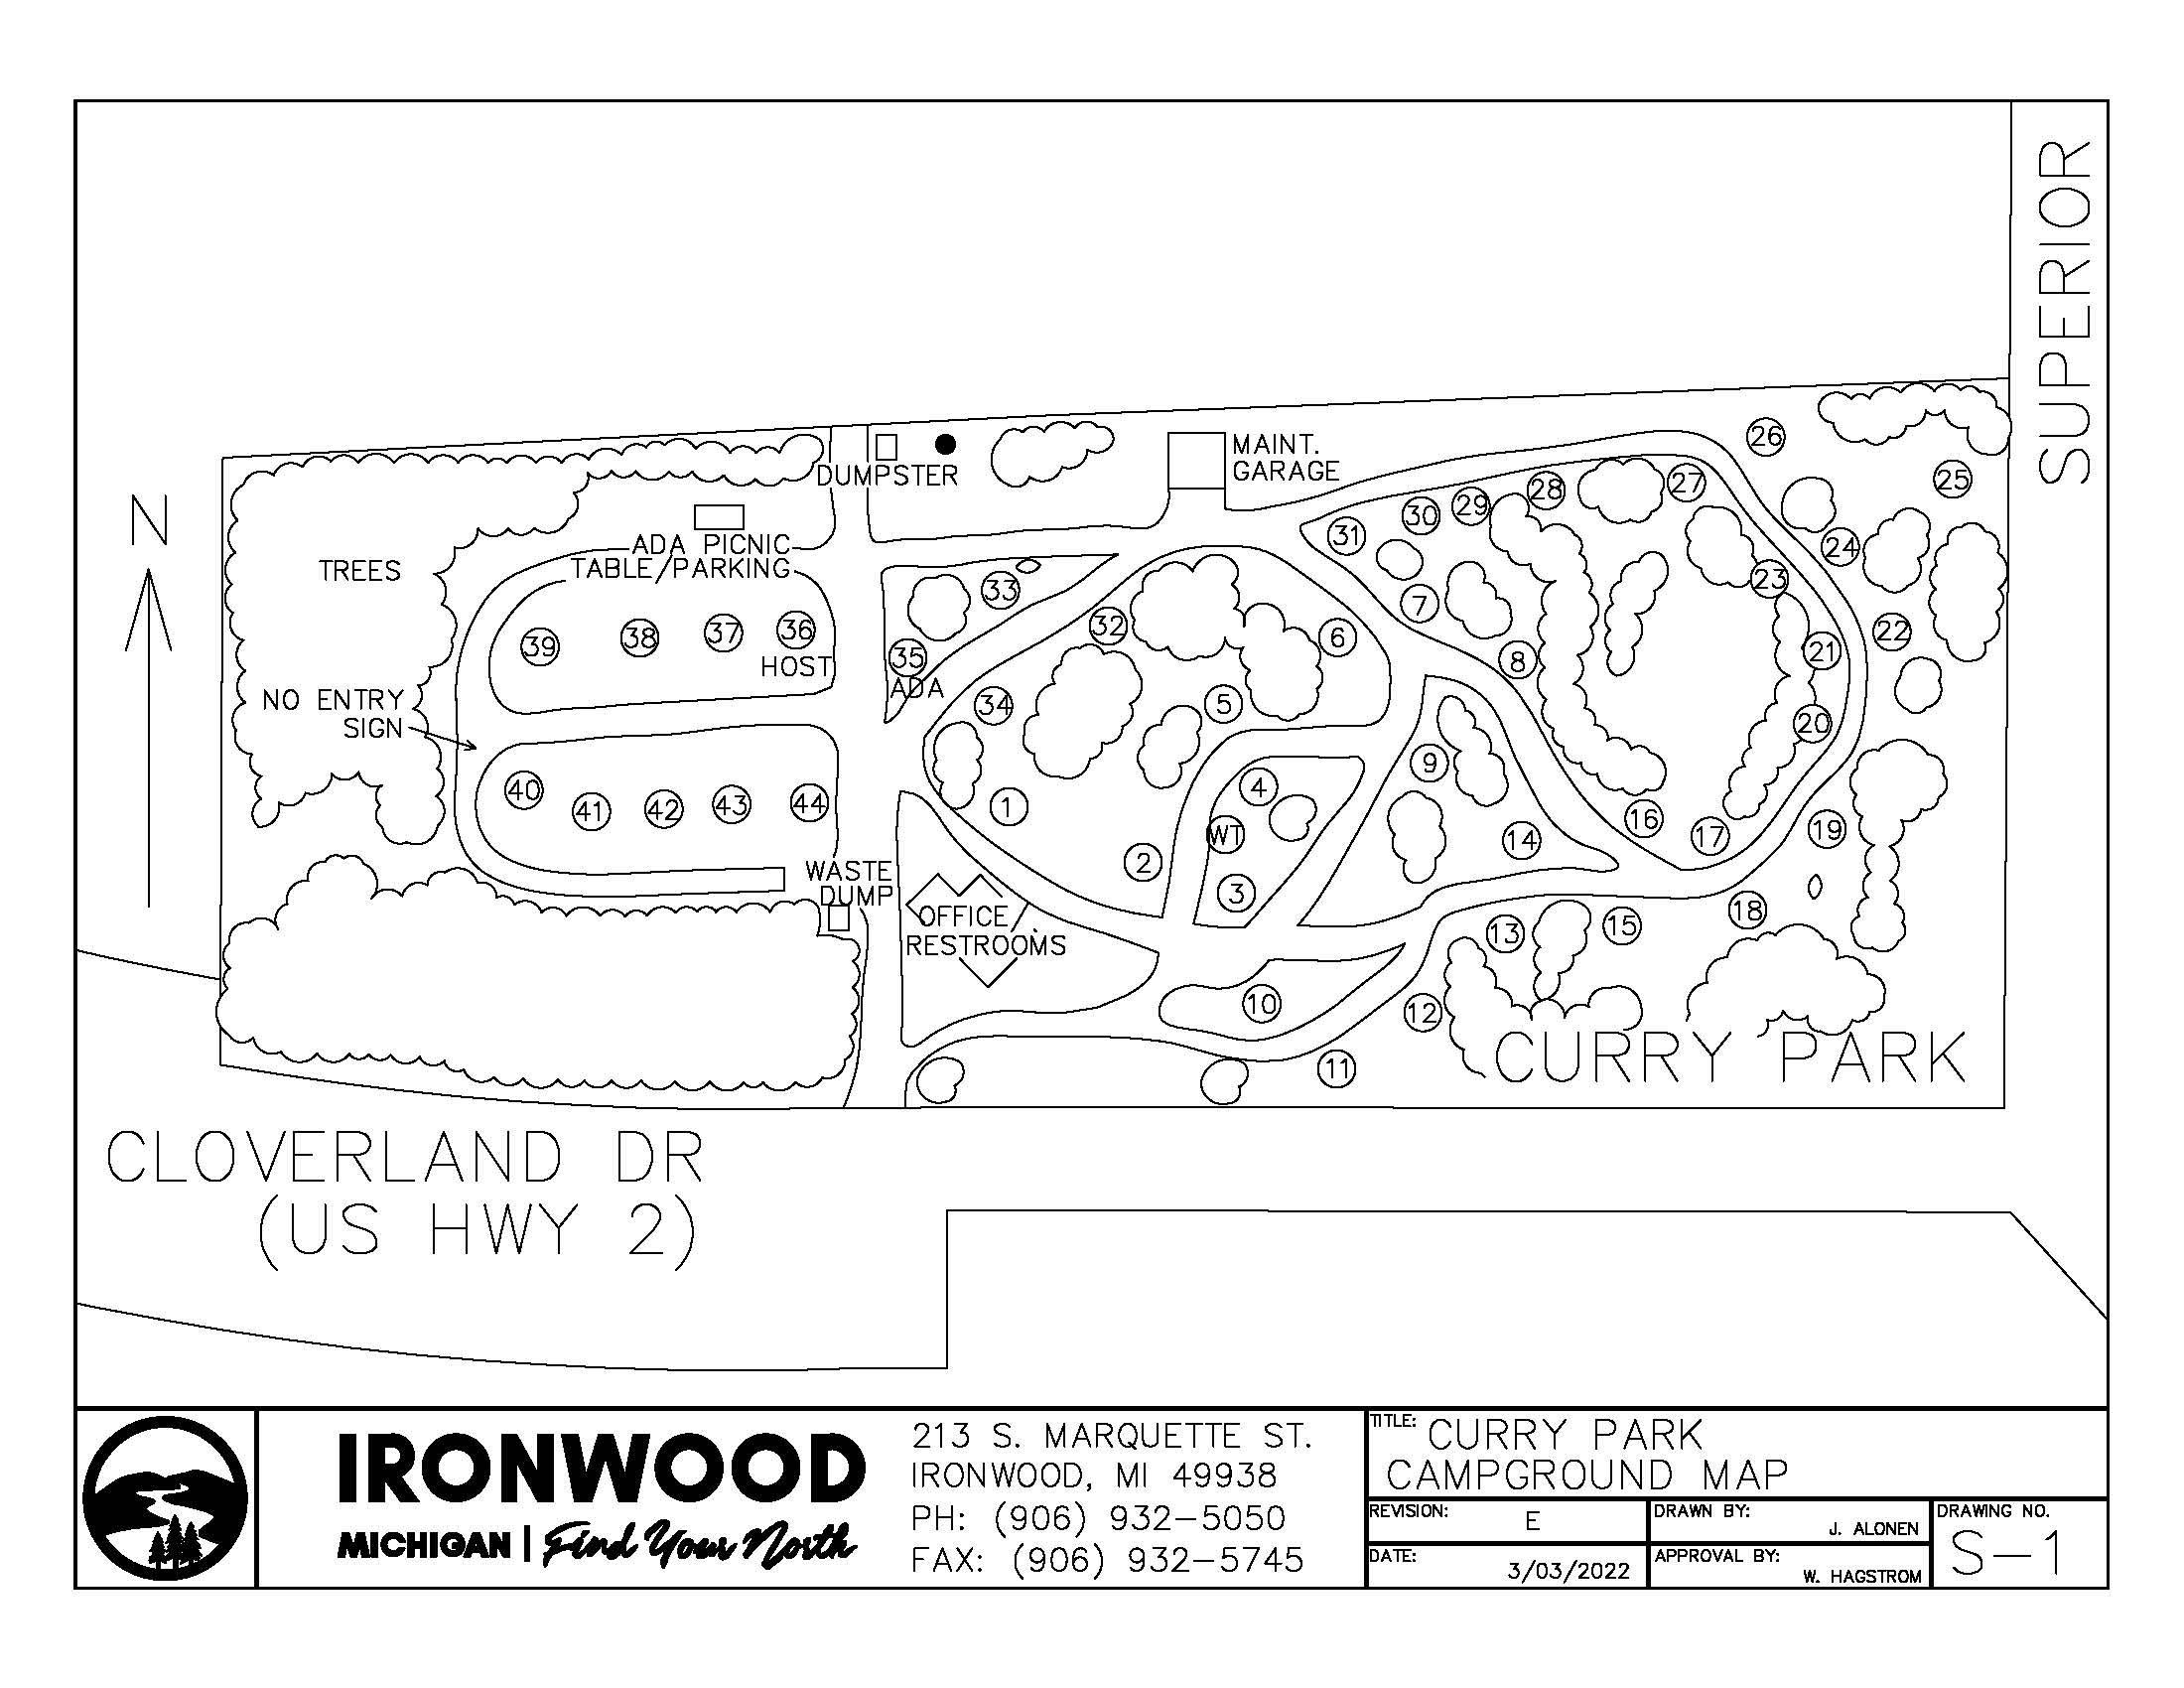 campground map revE